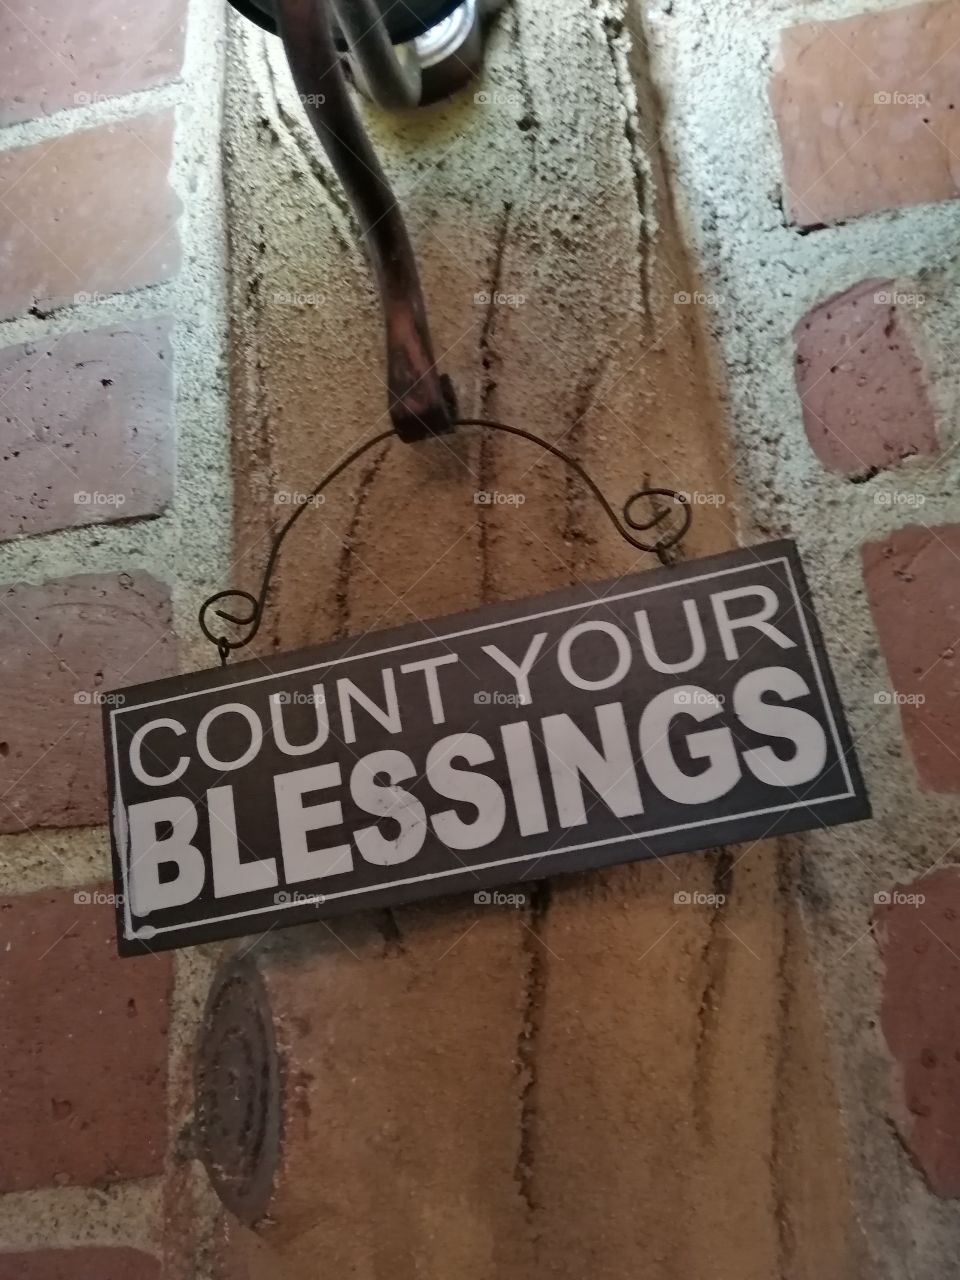 Always count your blessings.... i love it.